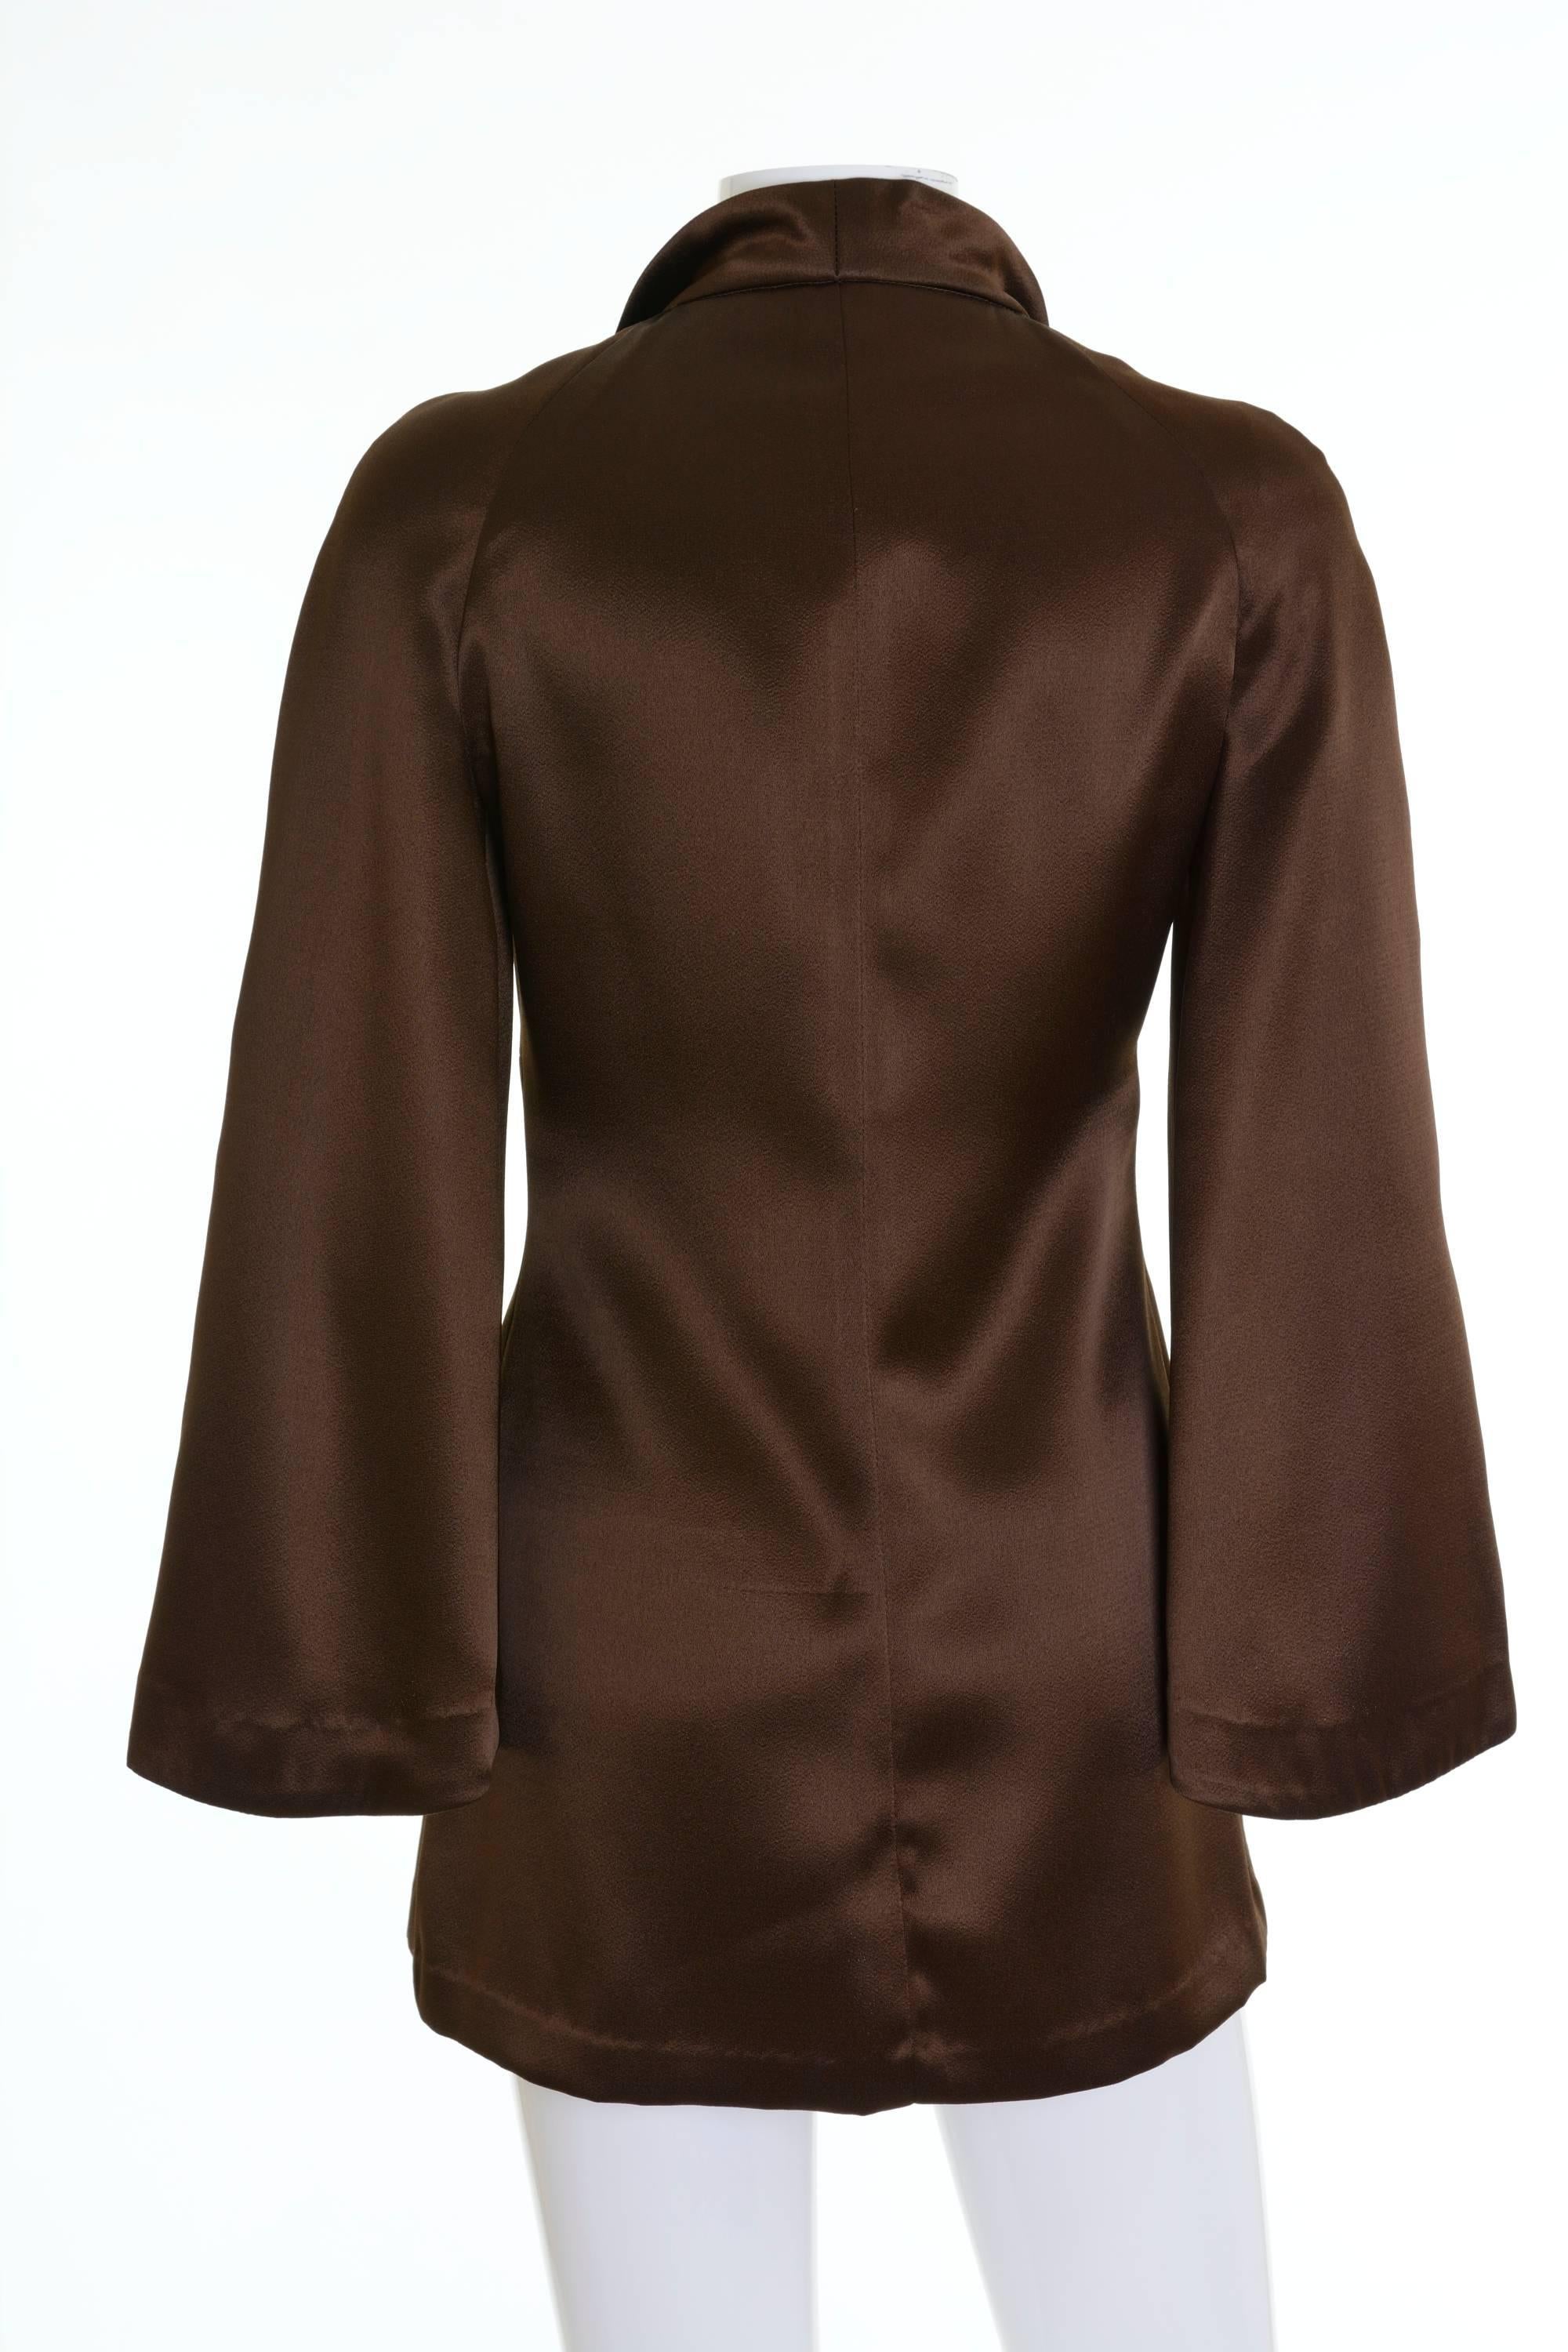 This amazing Biba 1970s blazer jacket is made with a dark brown satin fabric. It has one large button closure and cape sleeves. 

Excellent vintage condition

Label: Biba
Fabric: rayon
Color: brown

Measurement:
Label size 10
Estimeted size